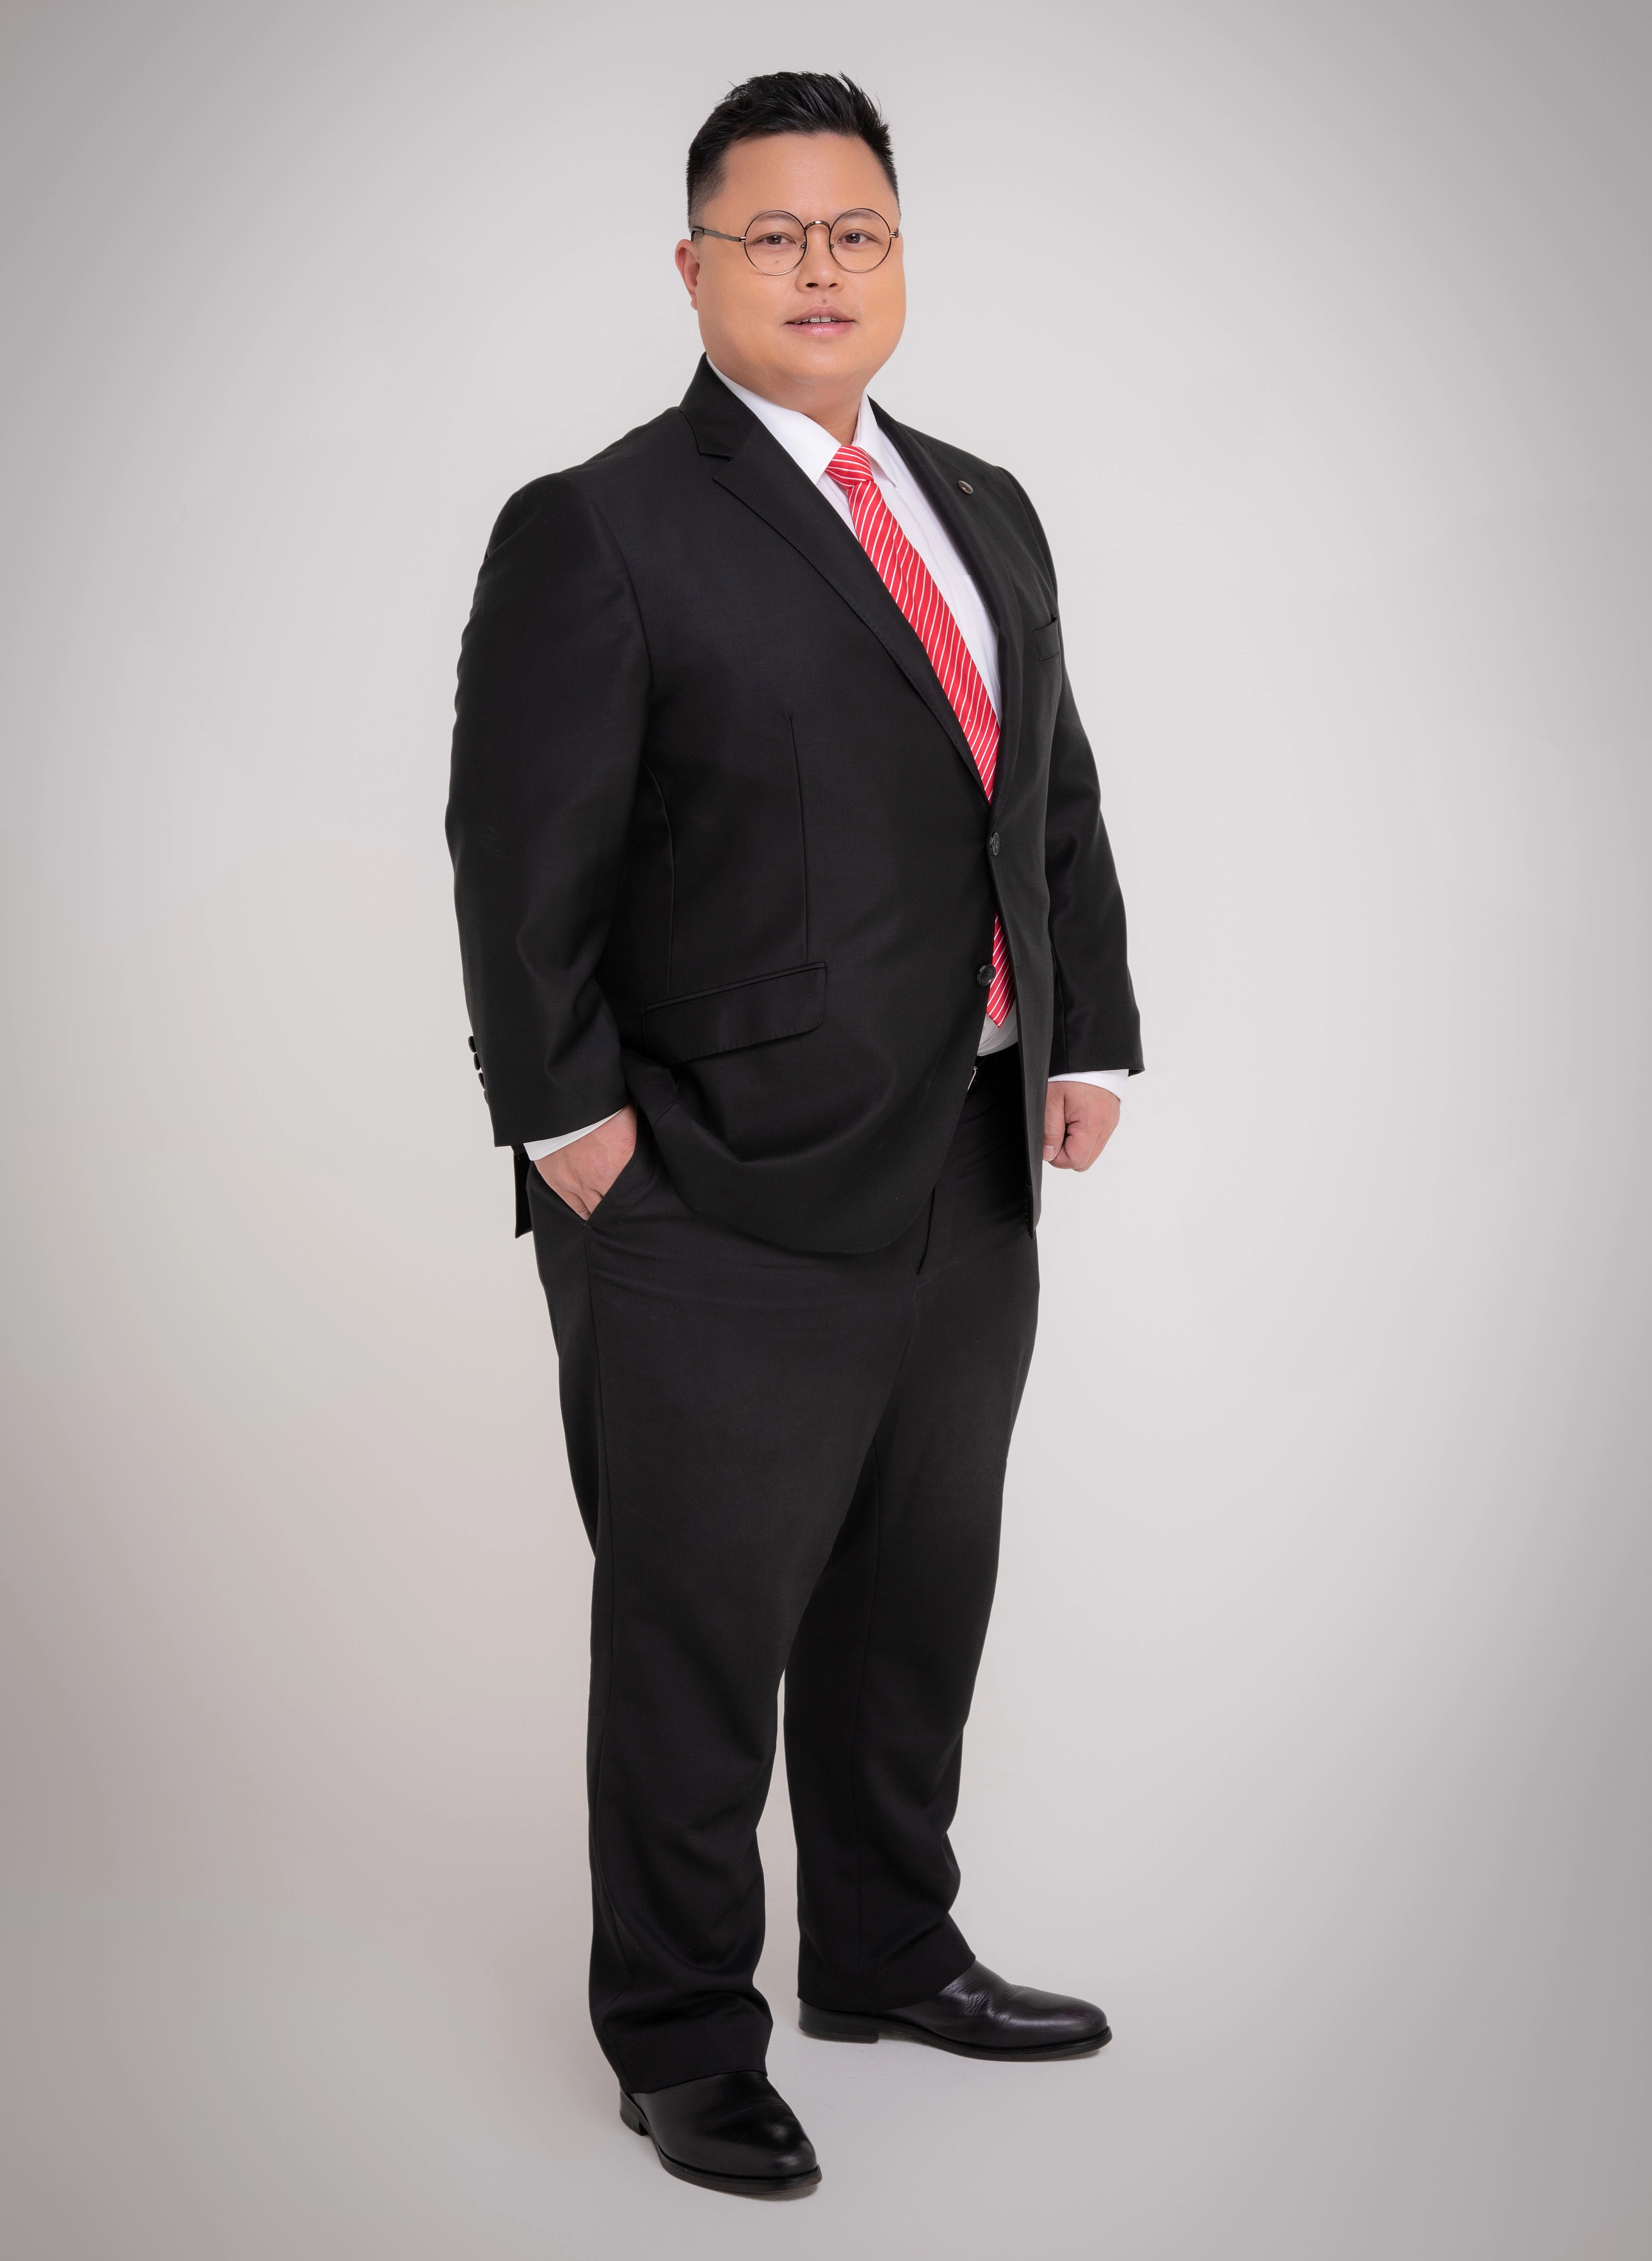 Terence Wu Real Estate Agent